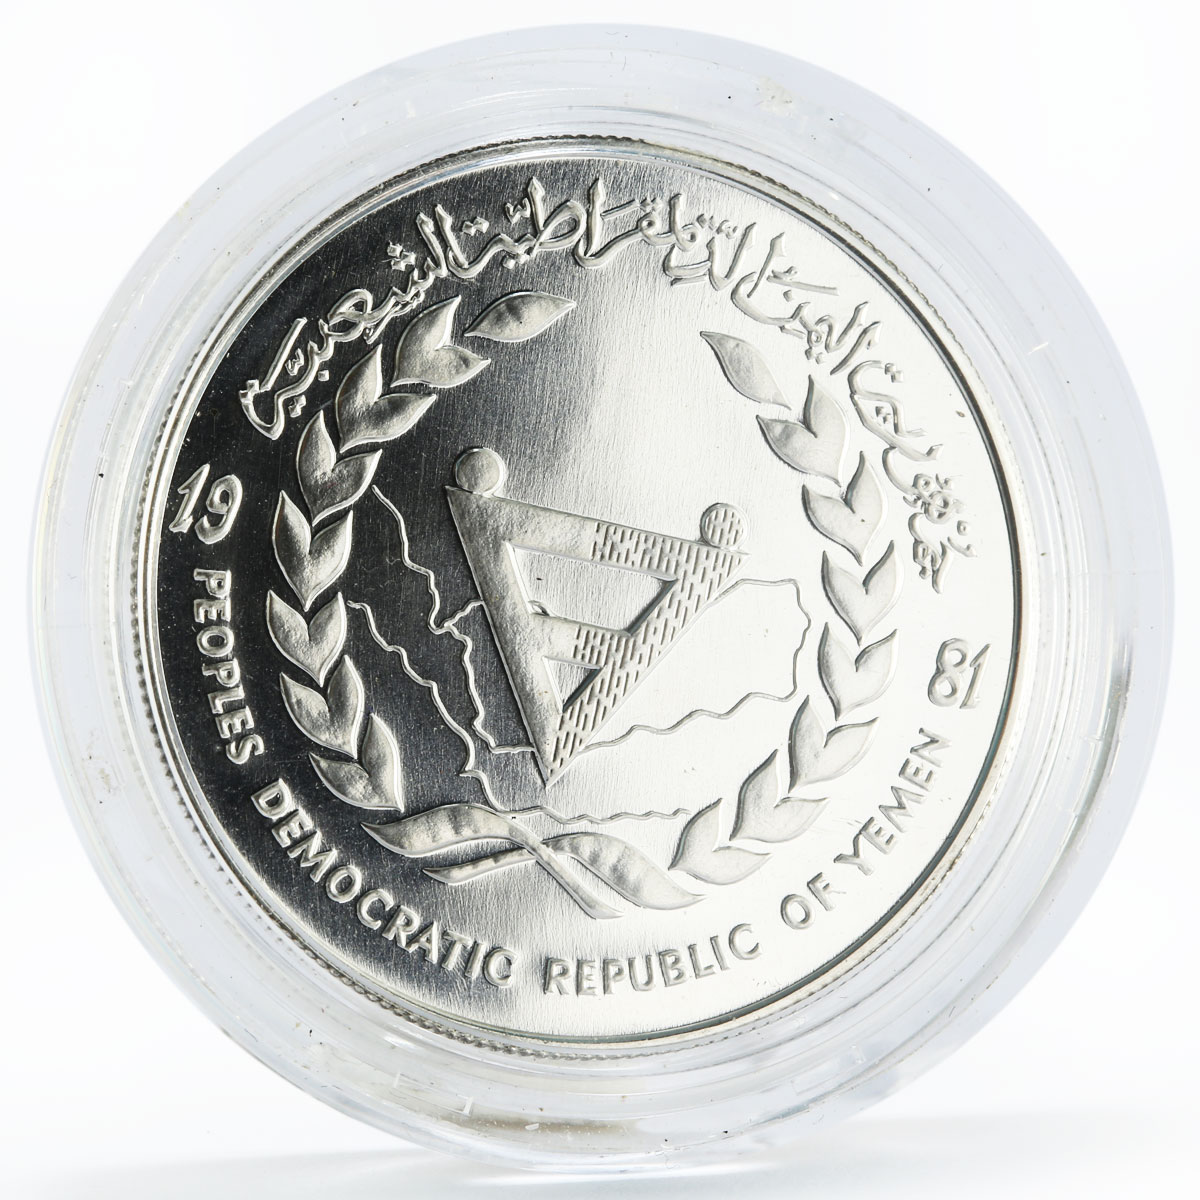 Yemen 2 dinars International Year of the Disabled Persons silver coin 1981